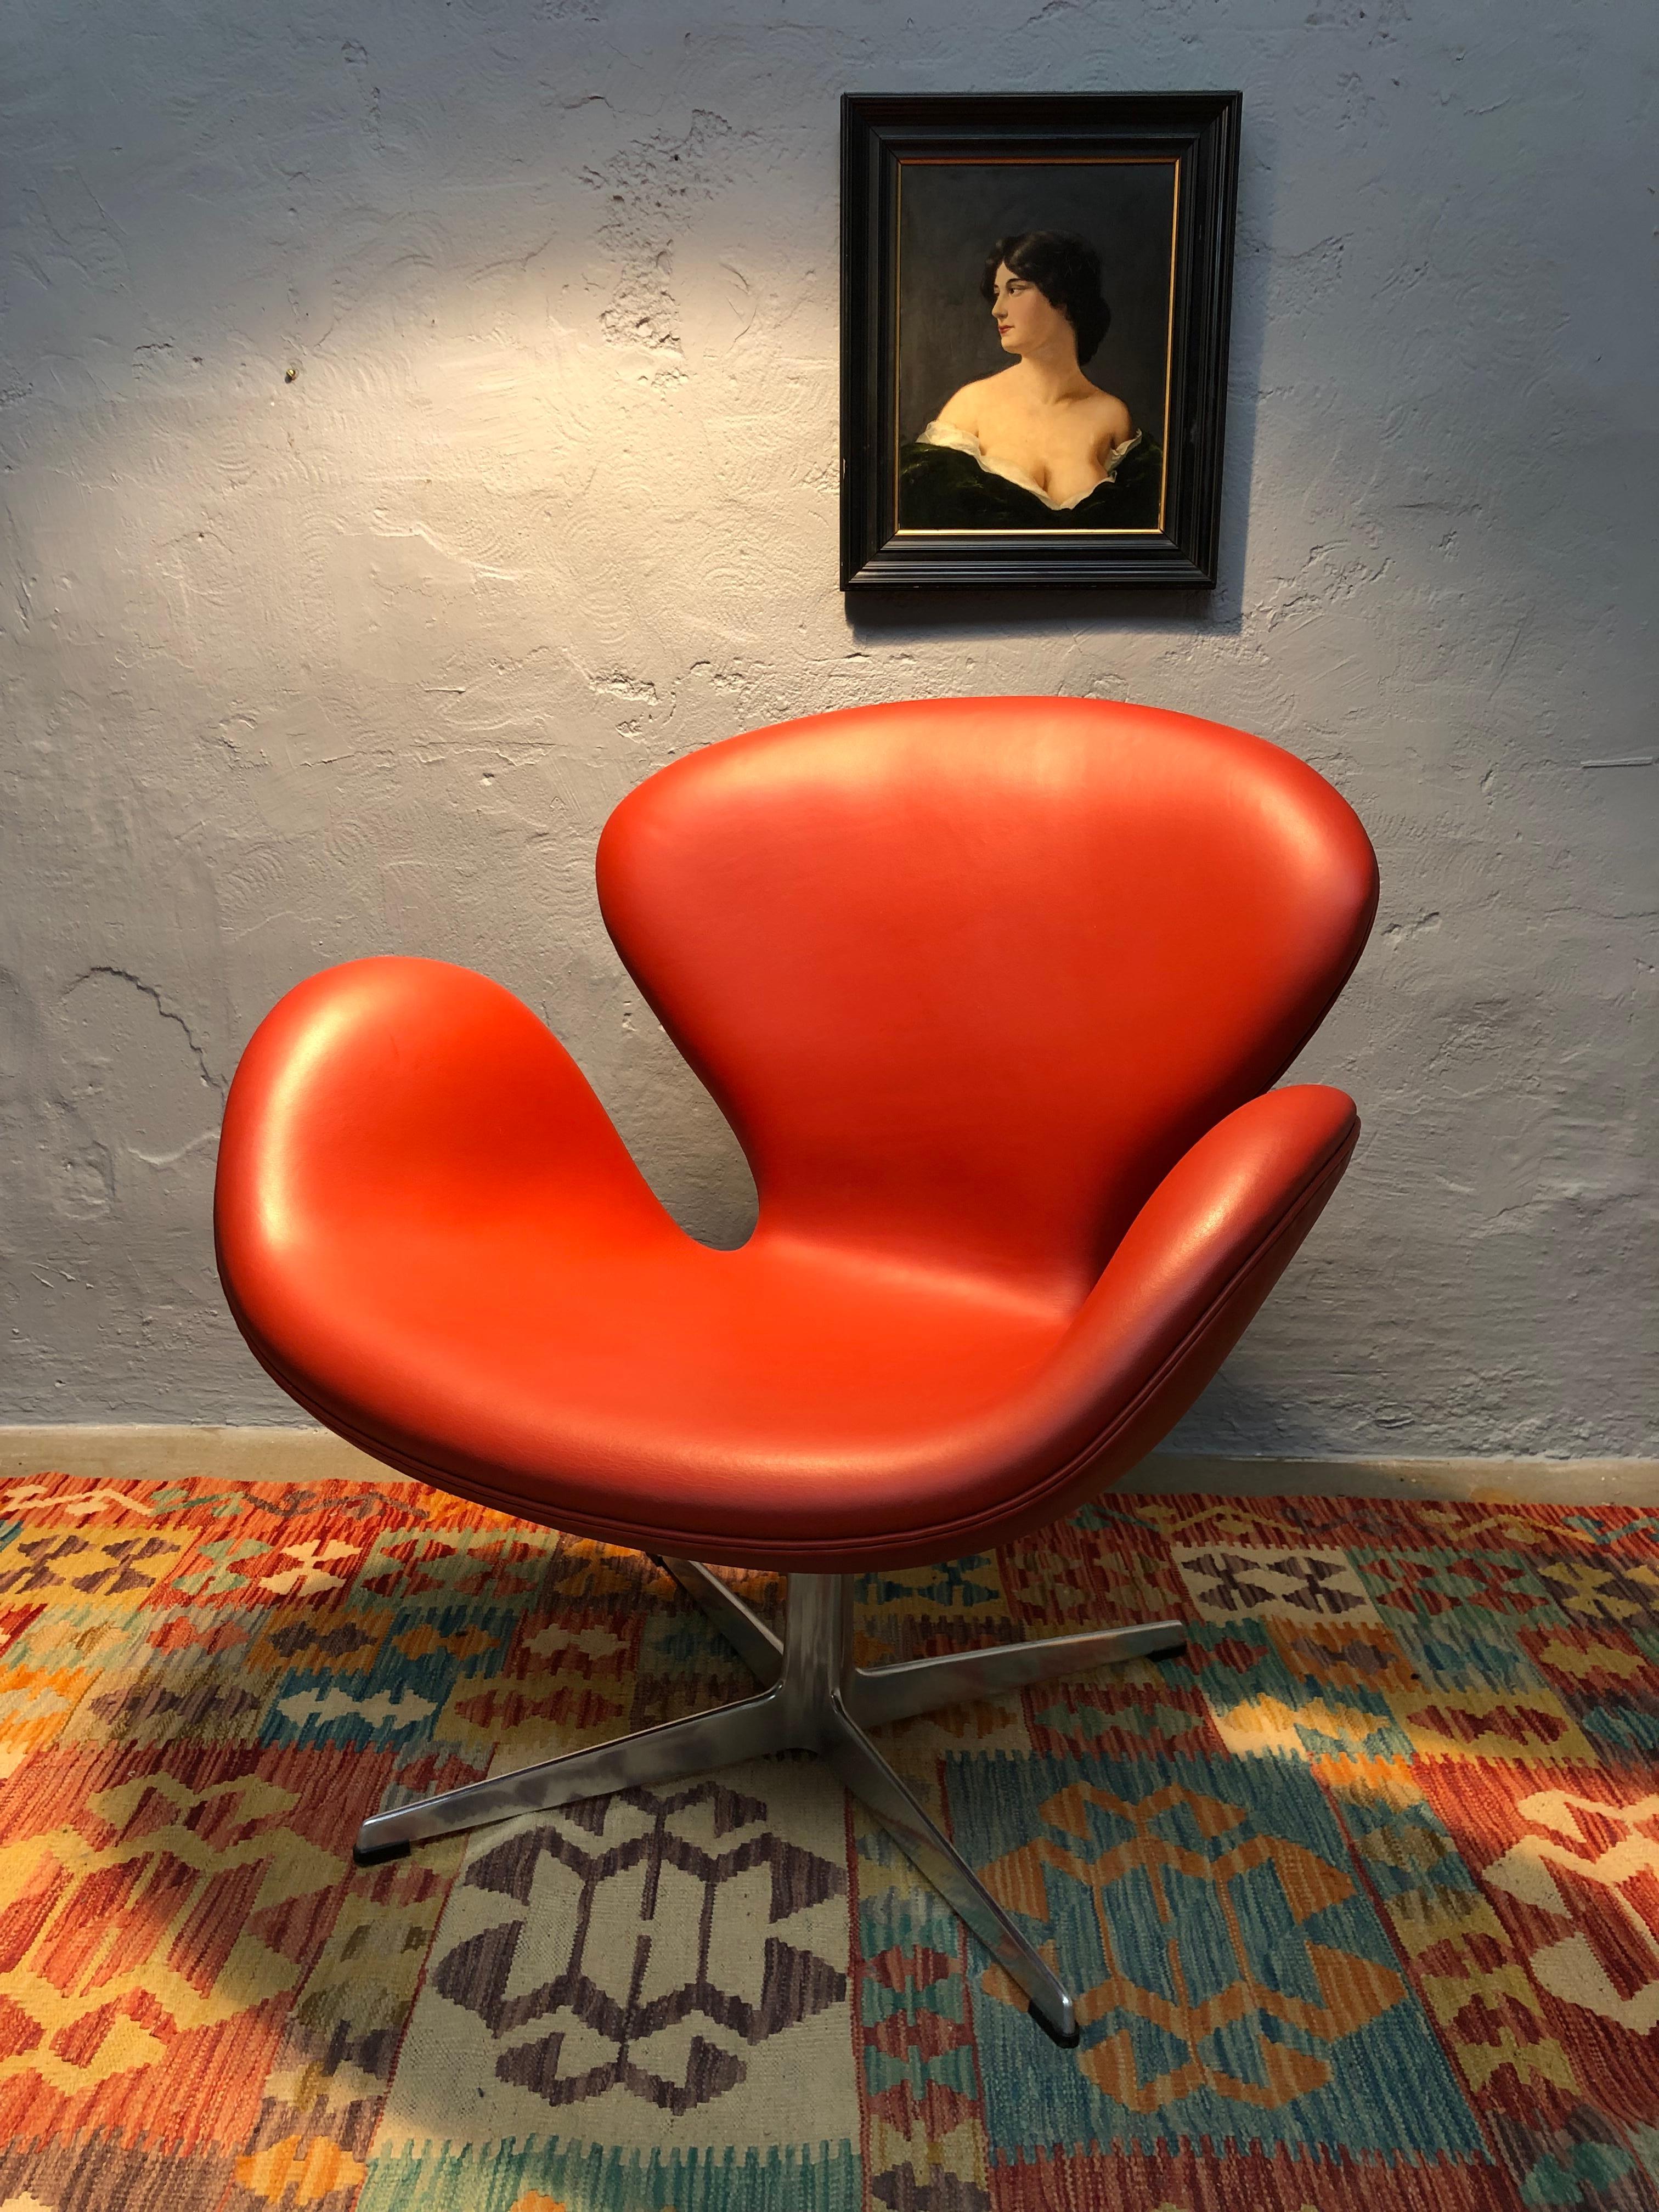 An early rare vintage lounge chair model 3320 The Swan Chair by Arne Jacobsen for Fritz Hansen of Denmark from 1963 in red leather.
This chair is in extremely good vintage condition for its age and with an elderly reupholstering in red leather.
This